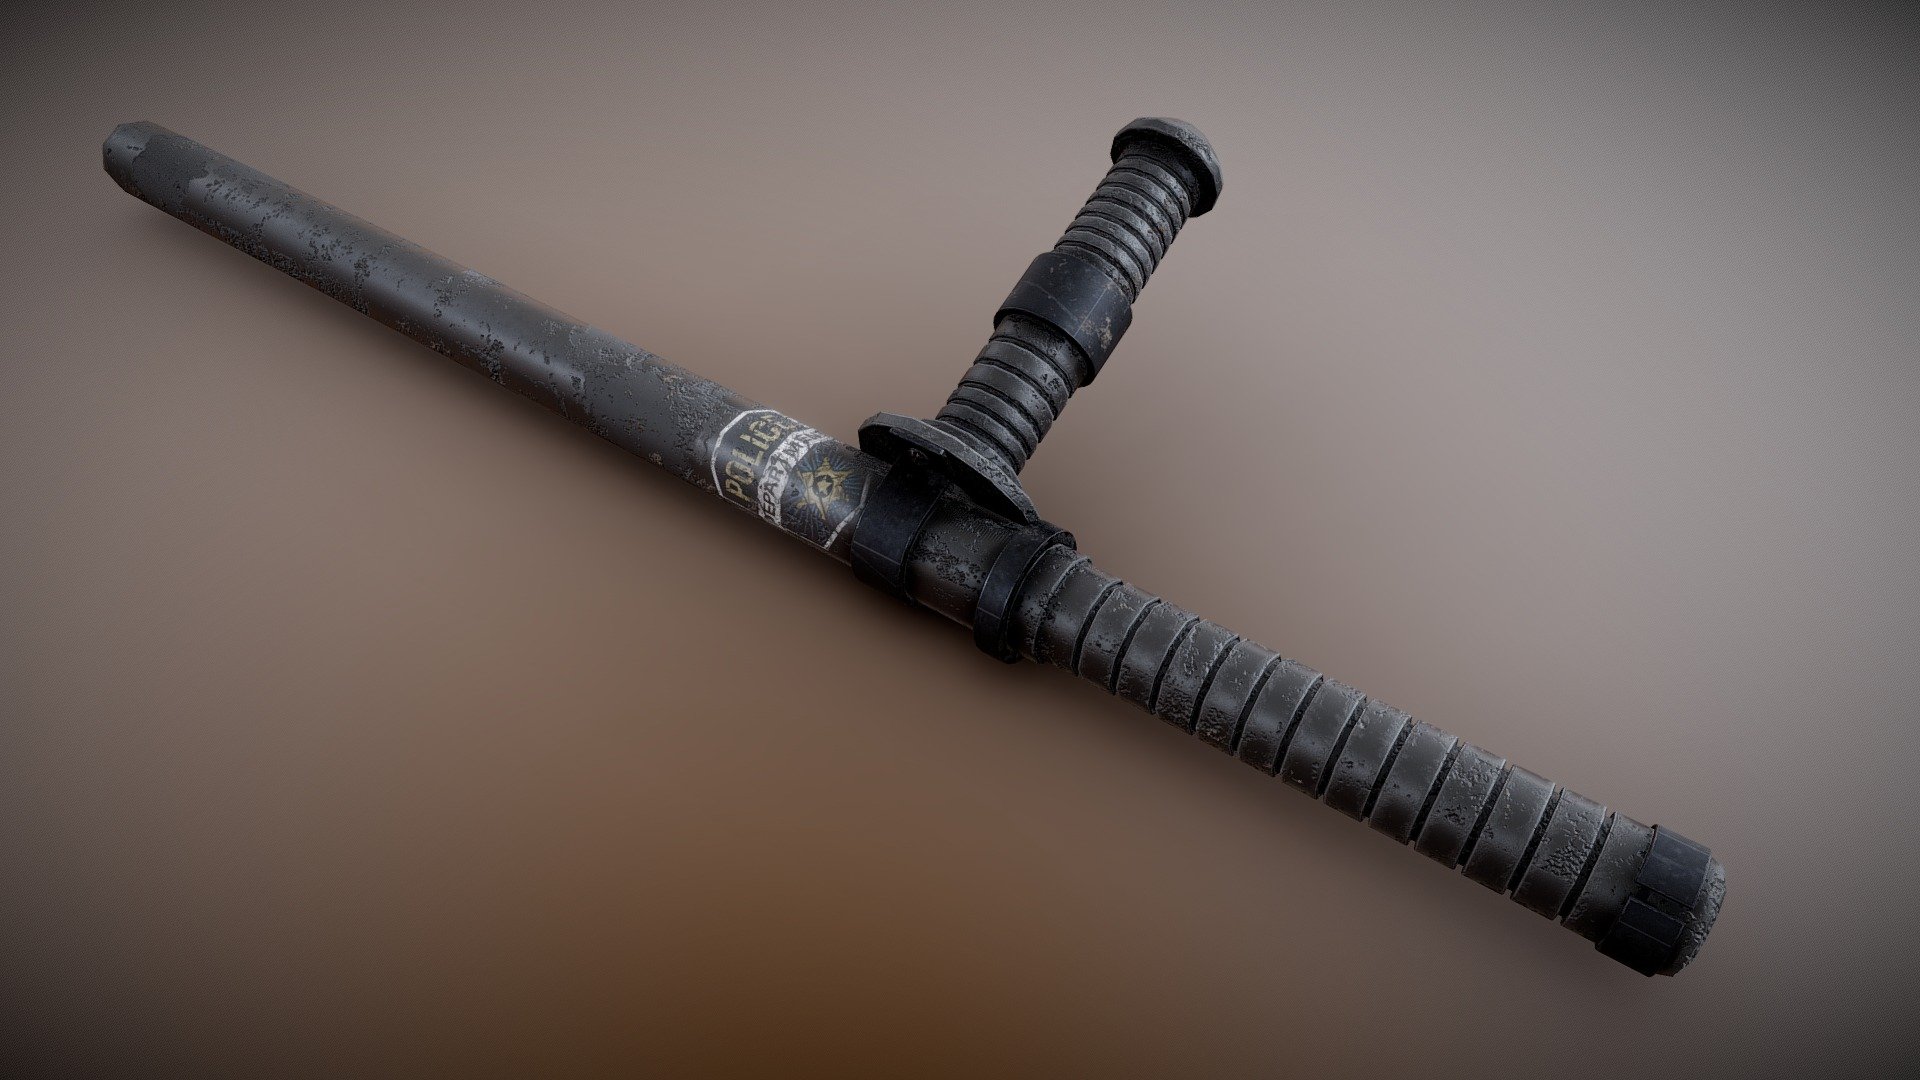 It's the Police baton! from Dying Light 2!
Will be turned into a mod for the VR game Blade &amp; Sorcery 3d model